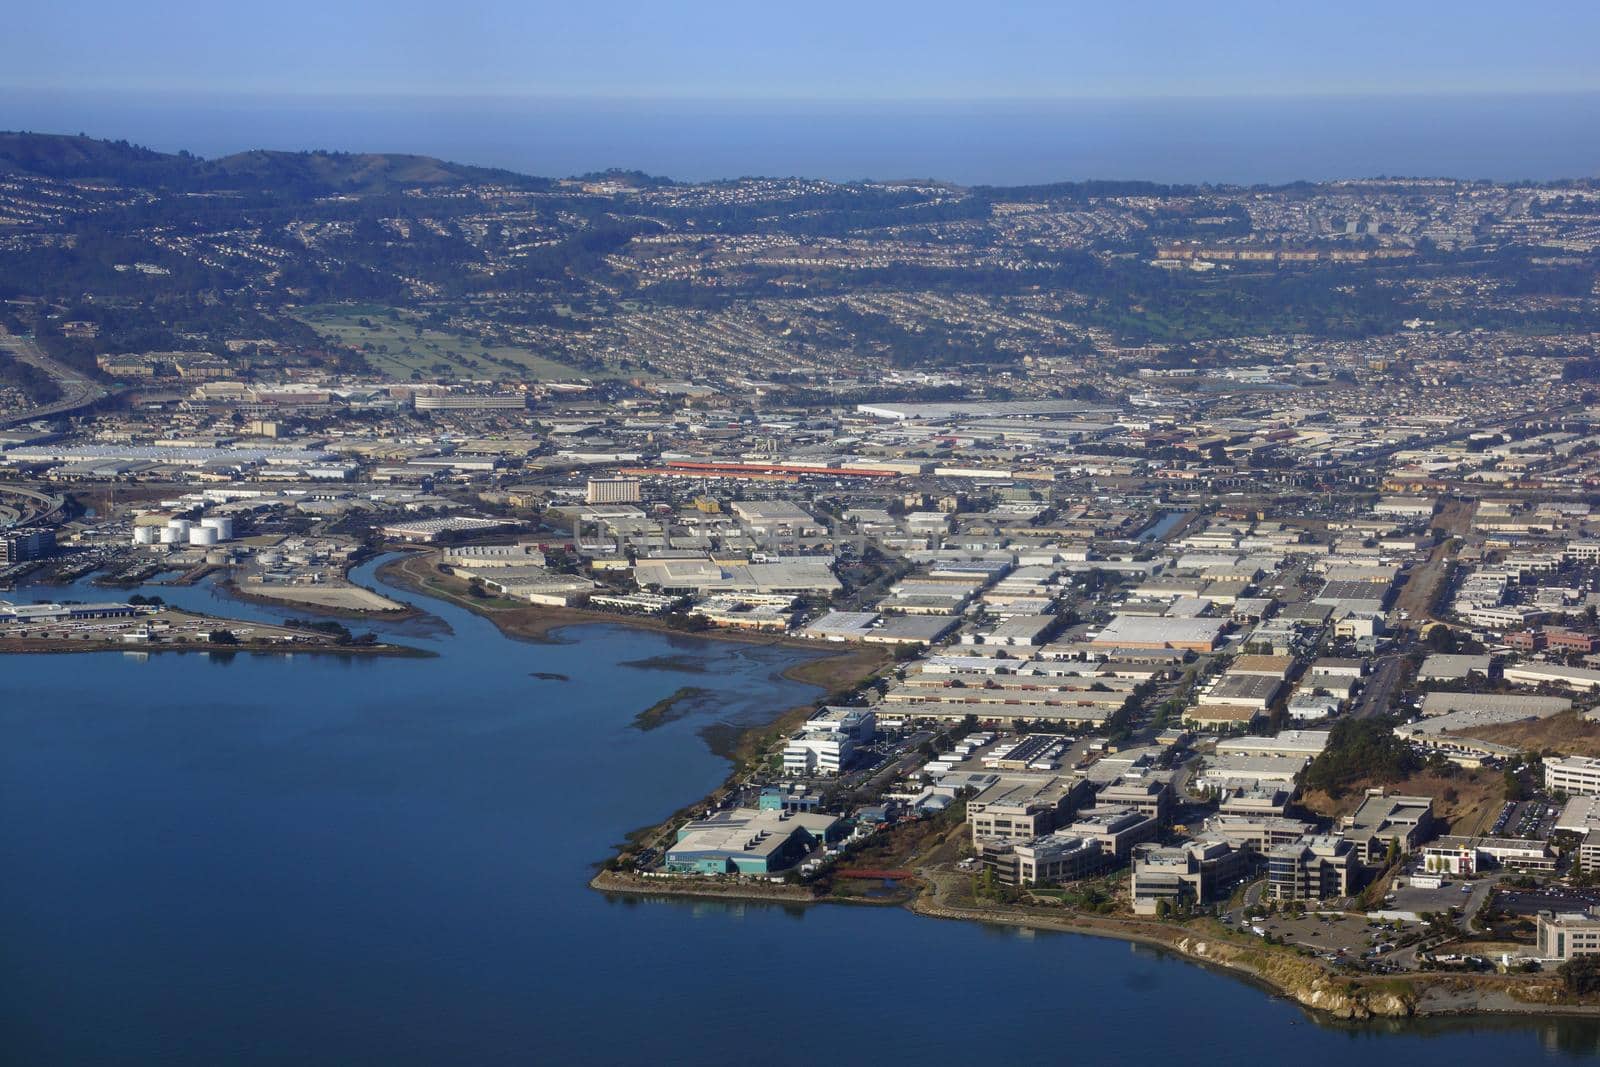 Aerial View of San Francisco Bay, City, and Pacific Ocean on a clear day.